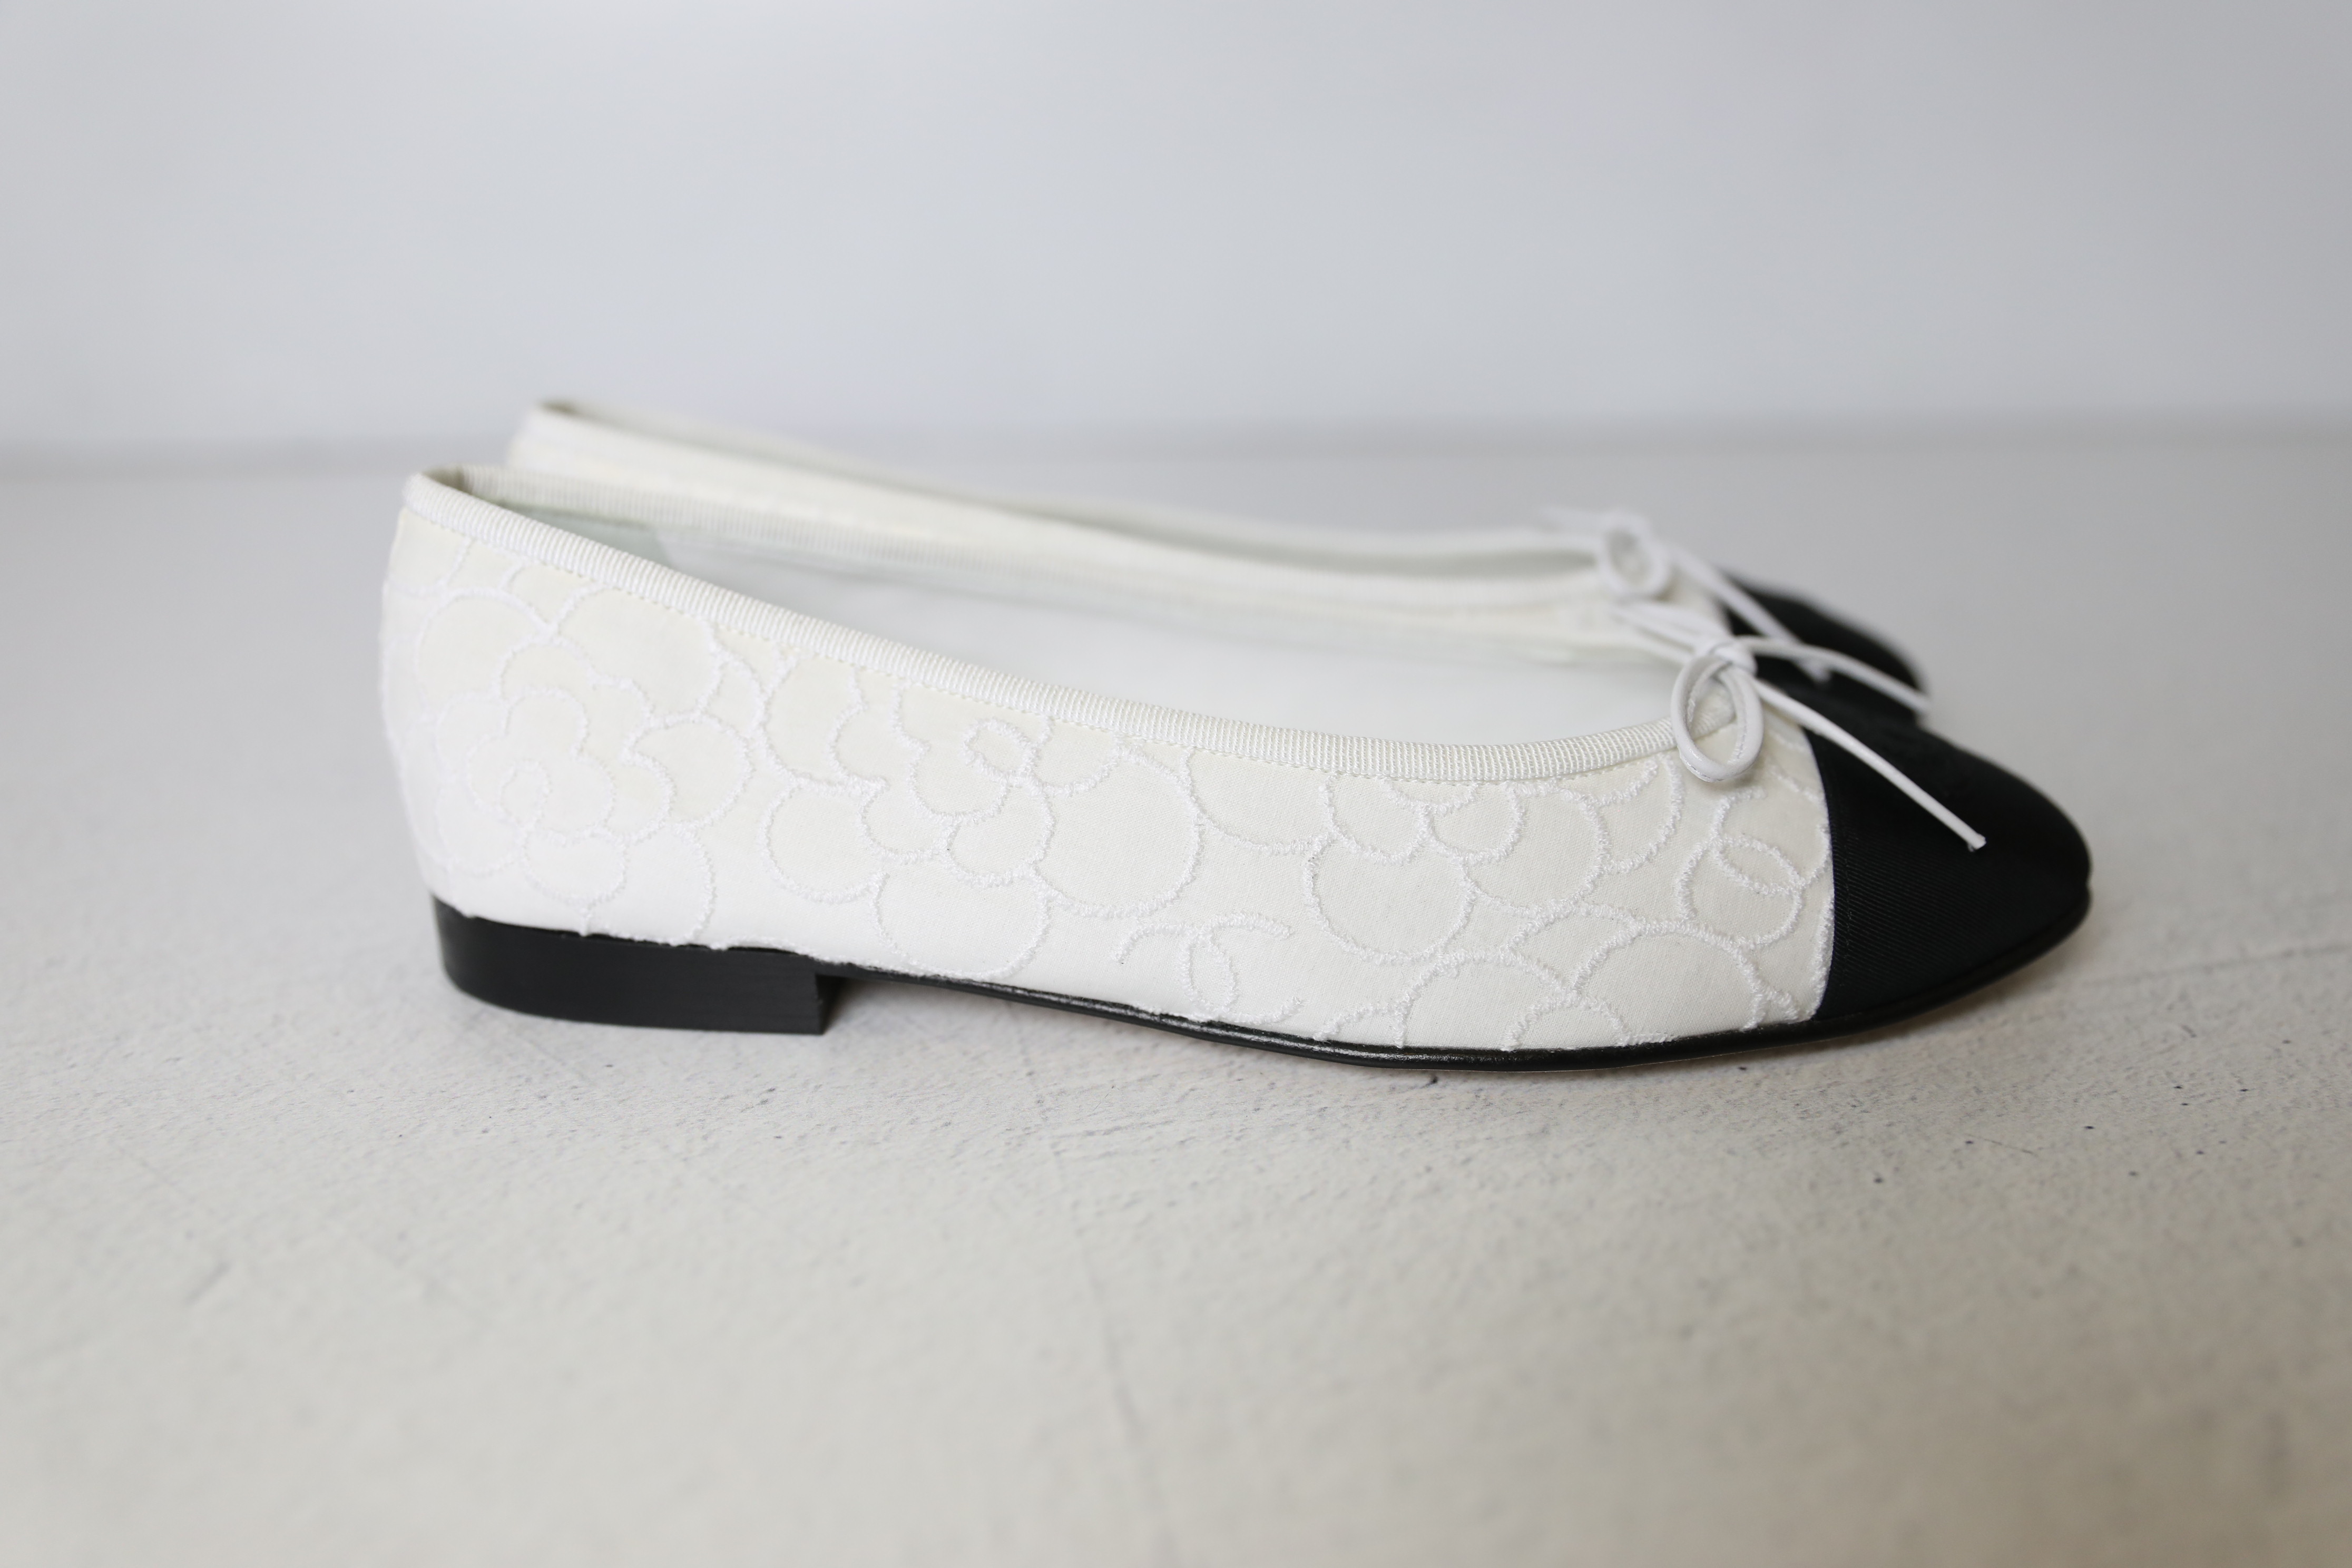 Chanel Ballet Flats, White and Black, Size 39, New in Box WA001